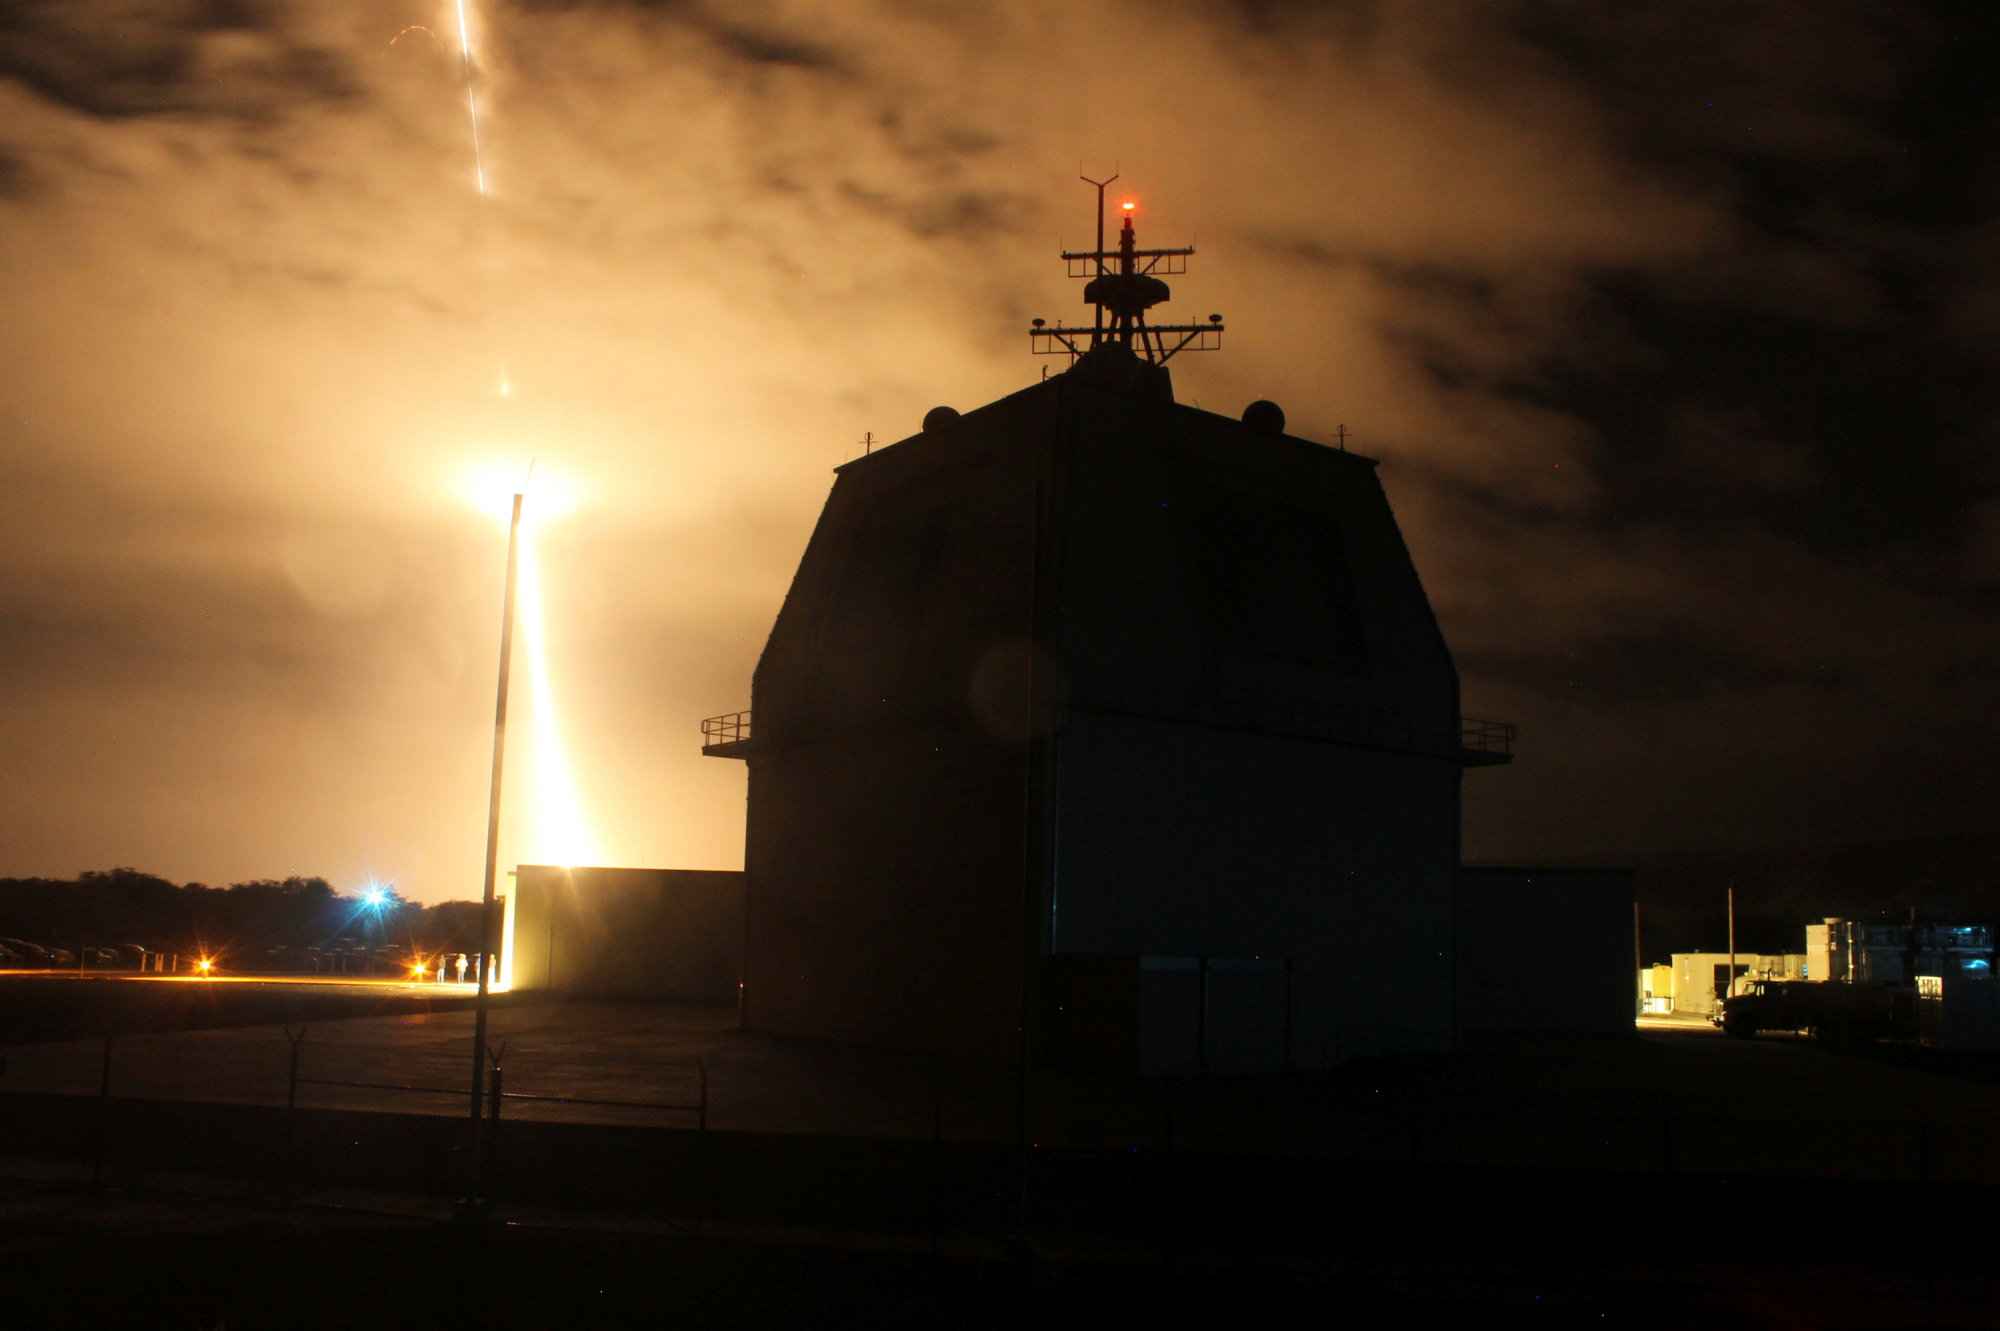 The U.S. Missile Defense Agency conducts the first intercept flight test of a land-based Aegis Ballistic Missile Defense weapon system from the Aegis Ashore Missile Defense Test Complex in Kauai, Hawaii, in December 2015. | REUTERS